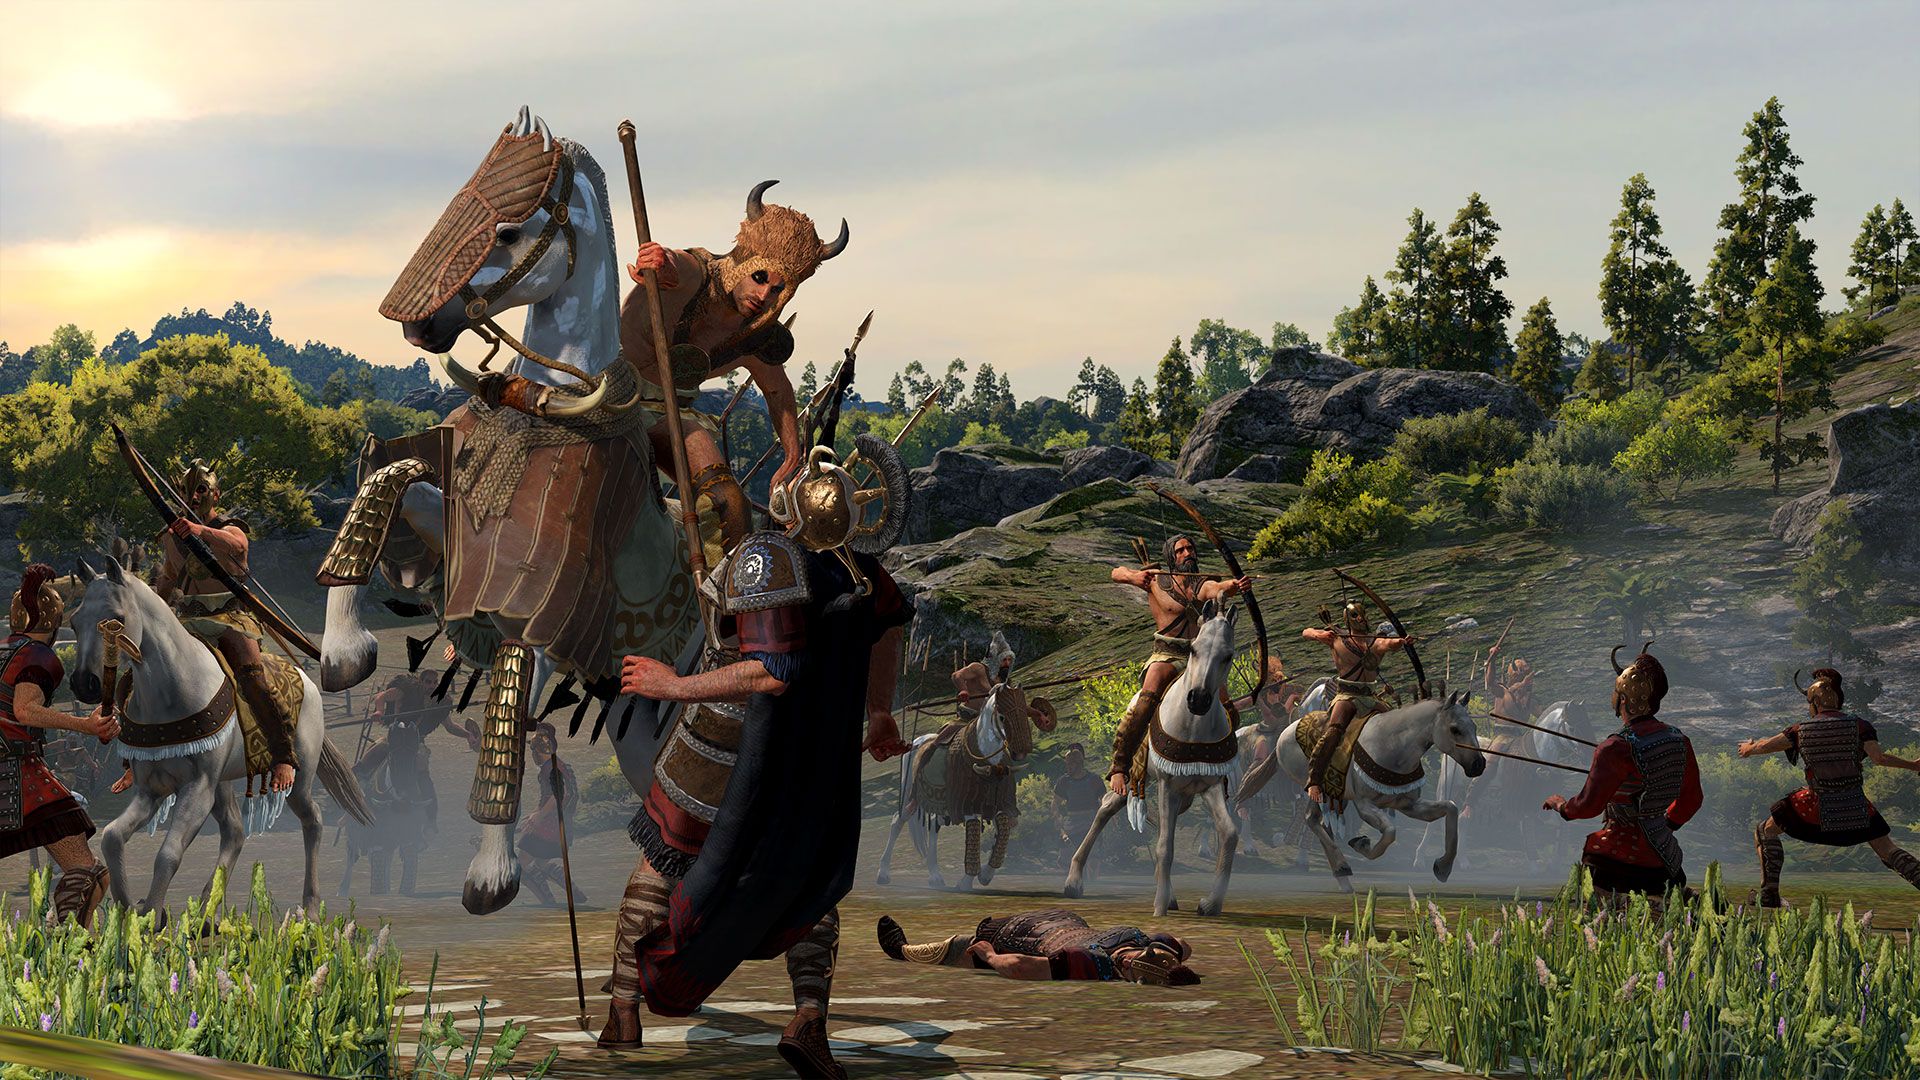 New Total War Saga: Troy gifts us a look at siege horses